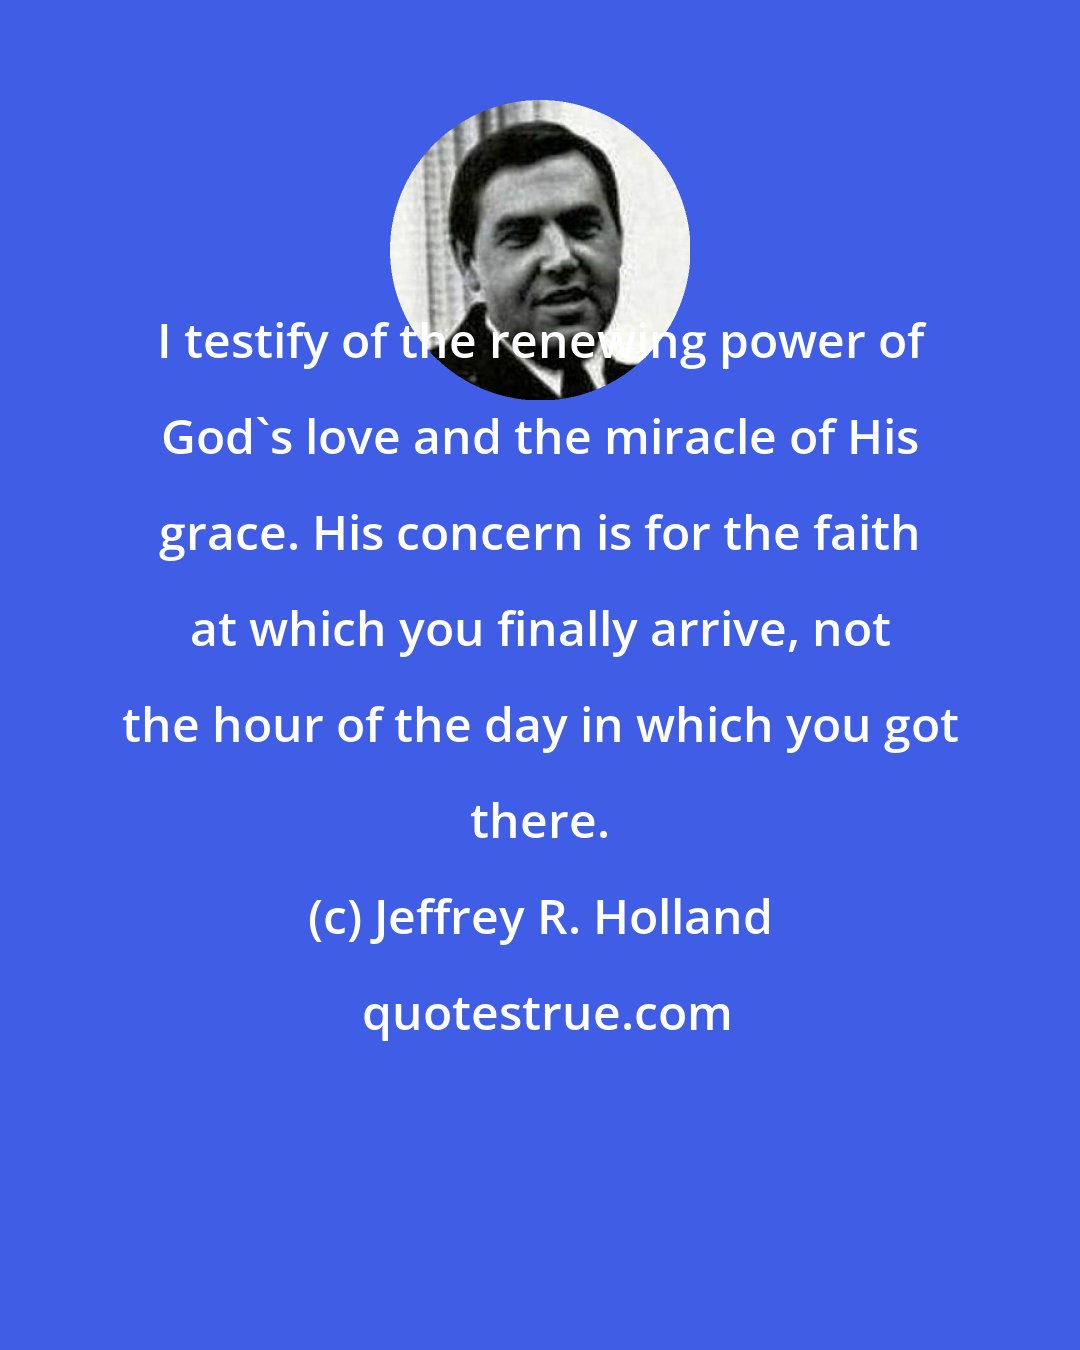 Jeffrey R. Holland: I testify of the renewing power of God's love and the miracle of His grace. His concern is for the faith at which you finally arrive, not the hour of the day in which you got there.